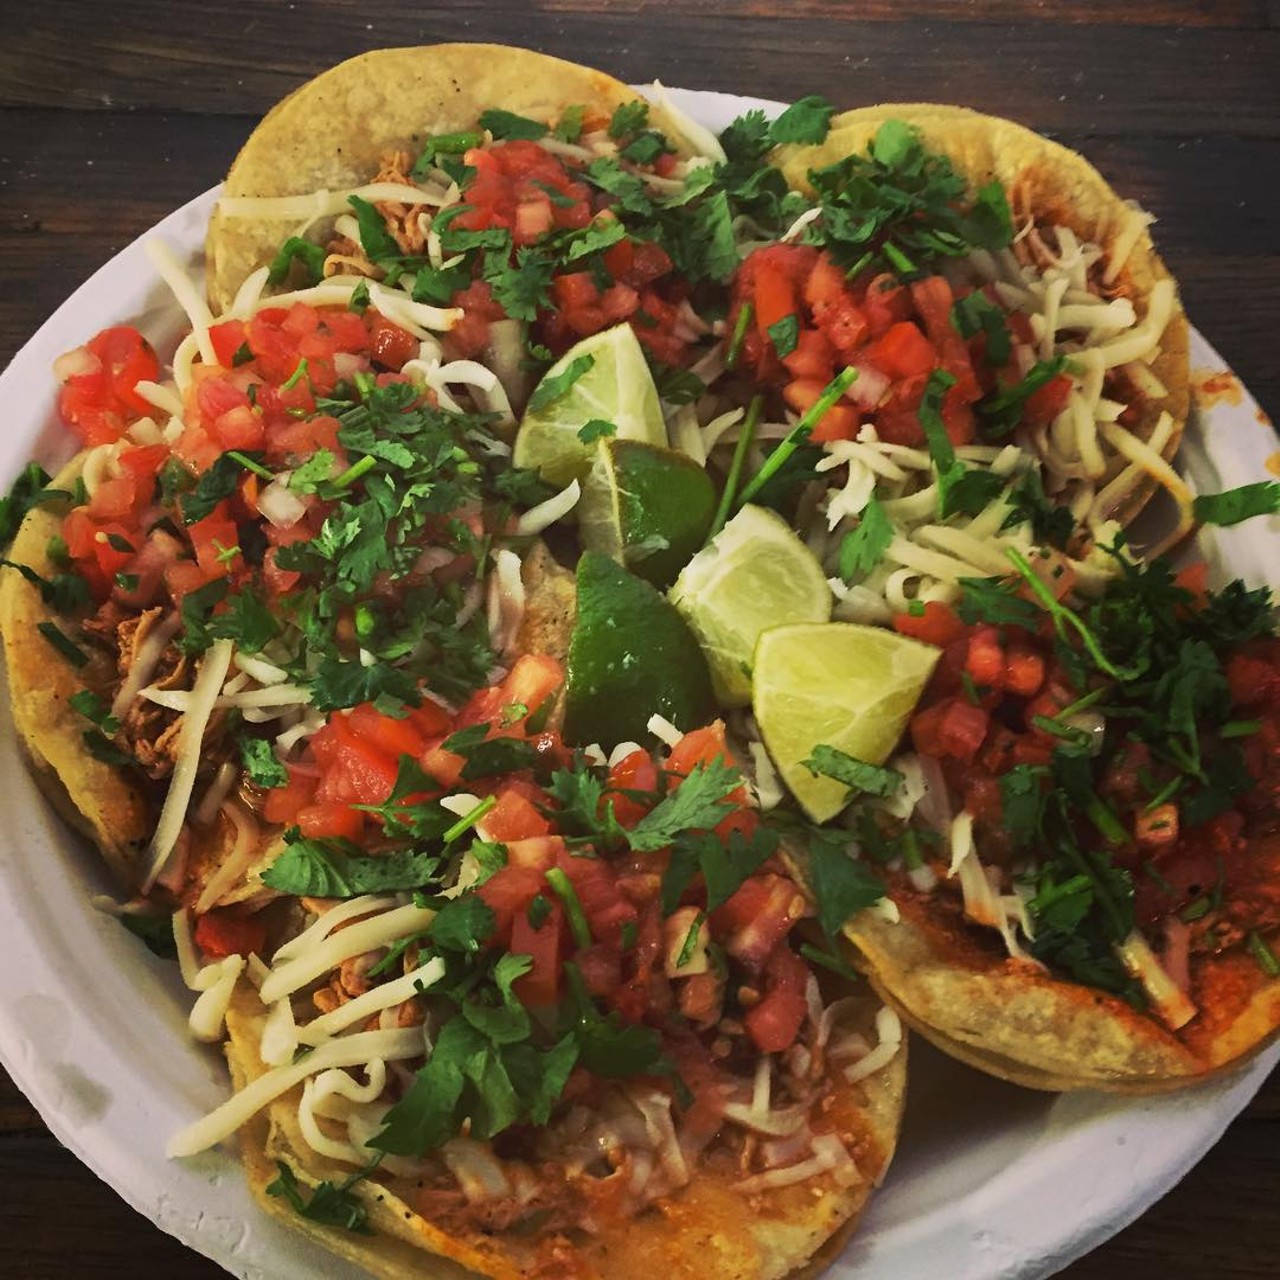 Tacos | Alley Taco  | $2.00 
Detroit | 4614 2nd Ave | (313) 833-0672 
Quick, fresh, quality and all without breaking the bank. Alley Taco, located in the back of Marcus Market, serves a good taco for a fair price. 
(Photo: Walbycon, via Instagram)